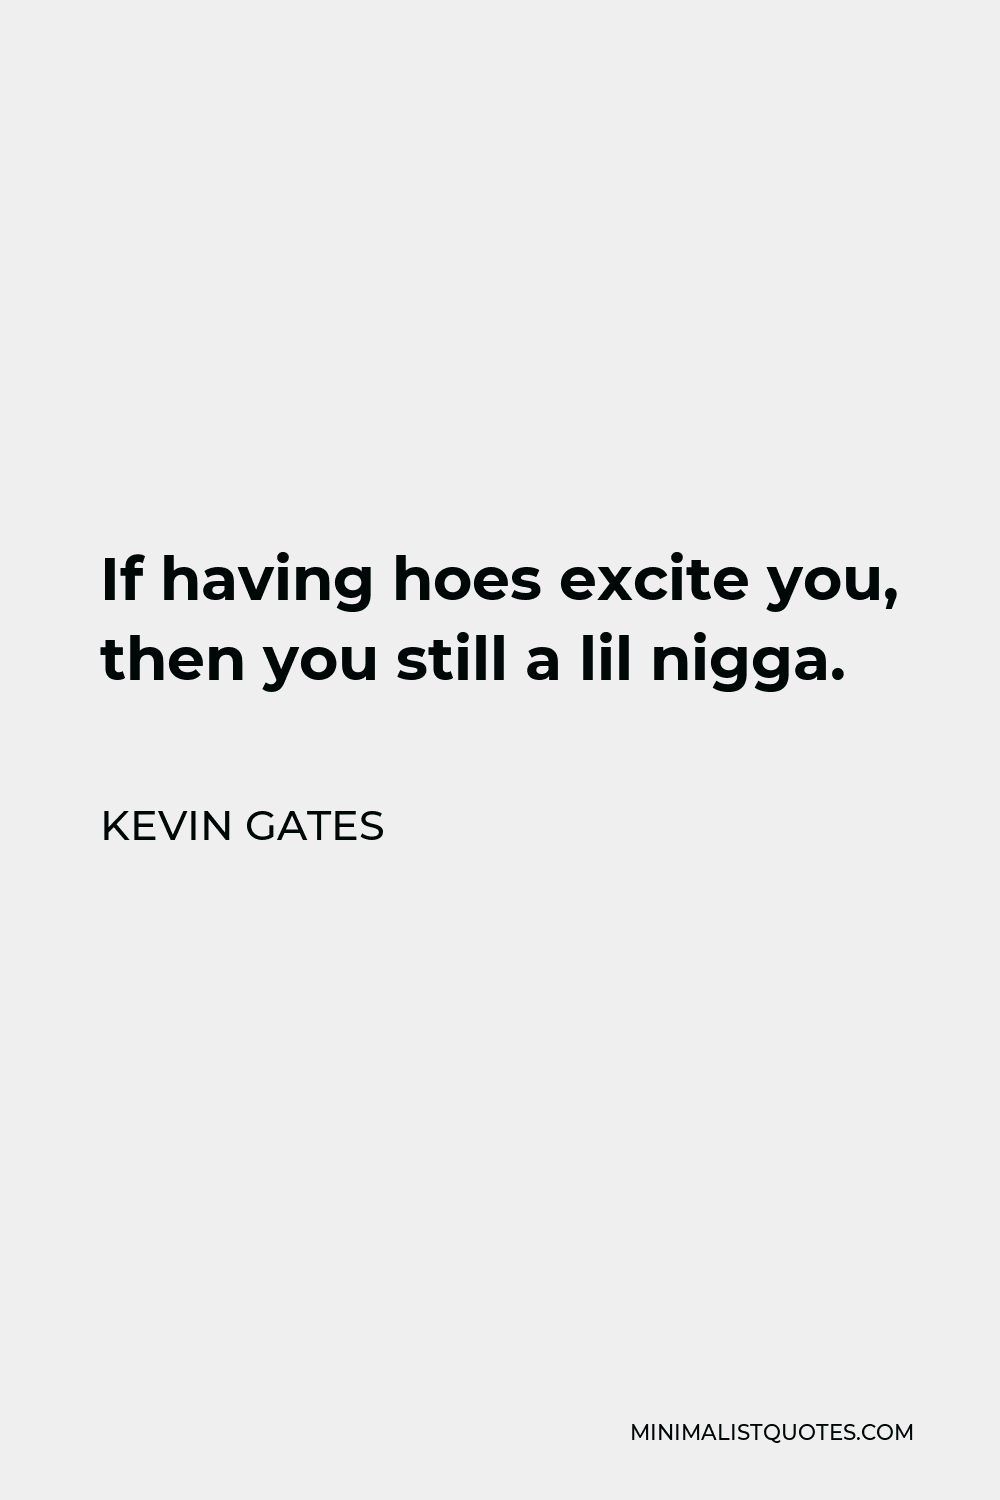 quotes about hoes